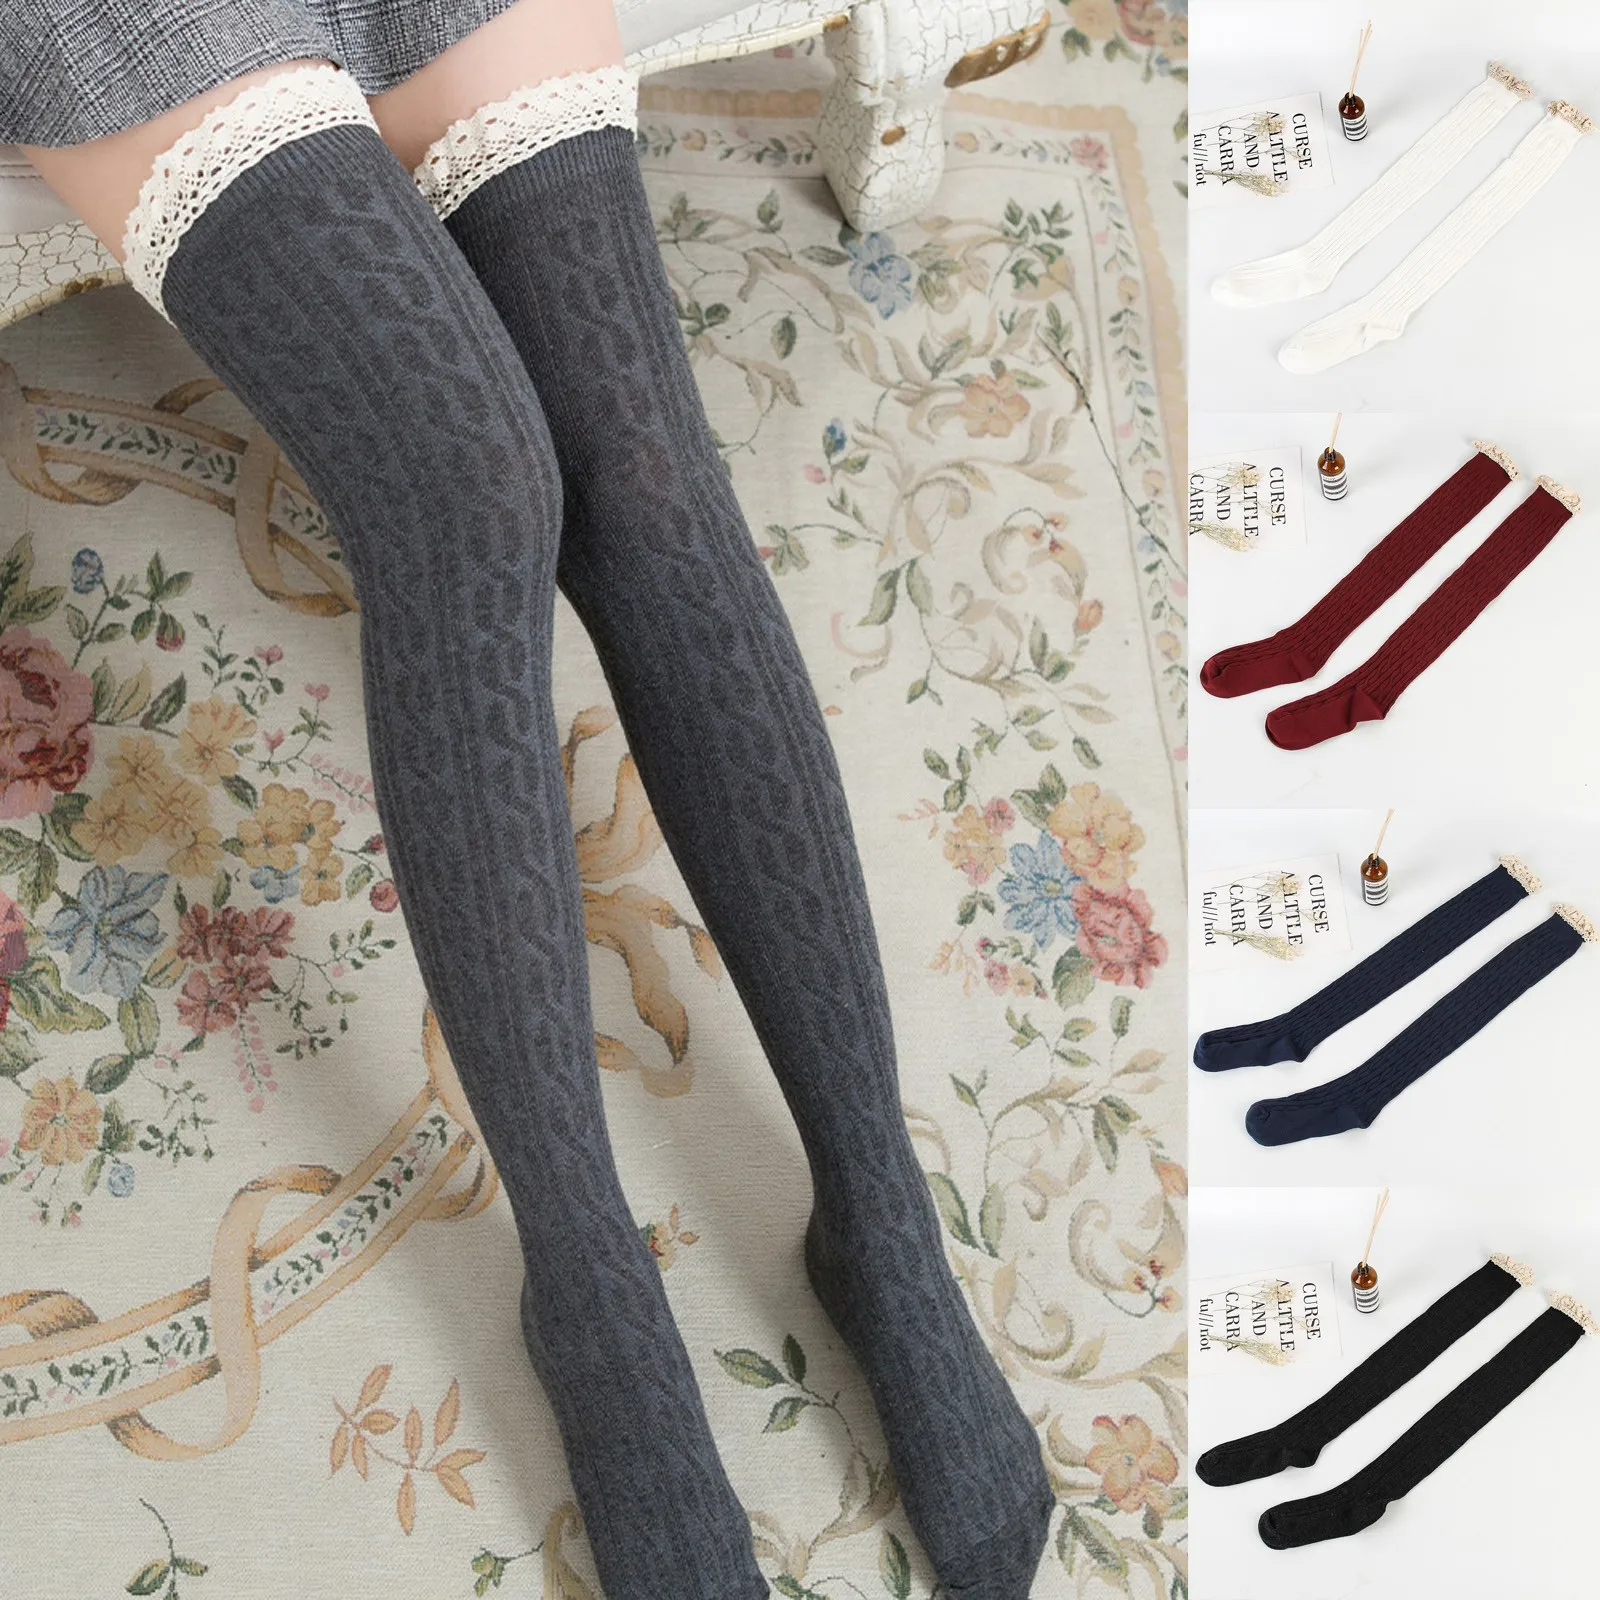 Women Winter Cable Knit Over knee Long Boot Thigh-High Warm Socks Leggings Lot 